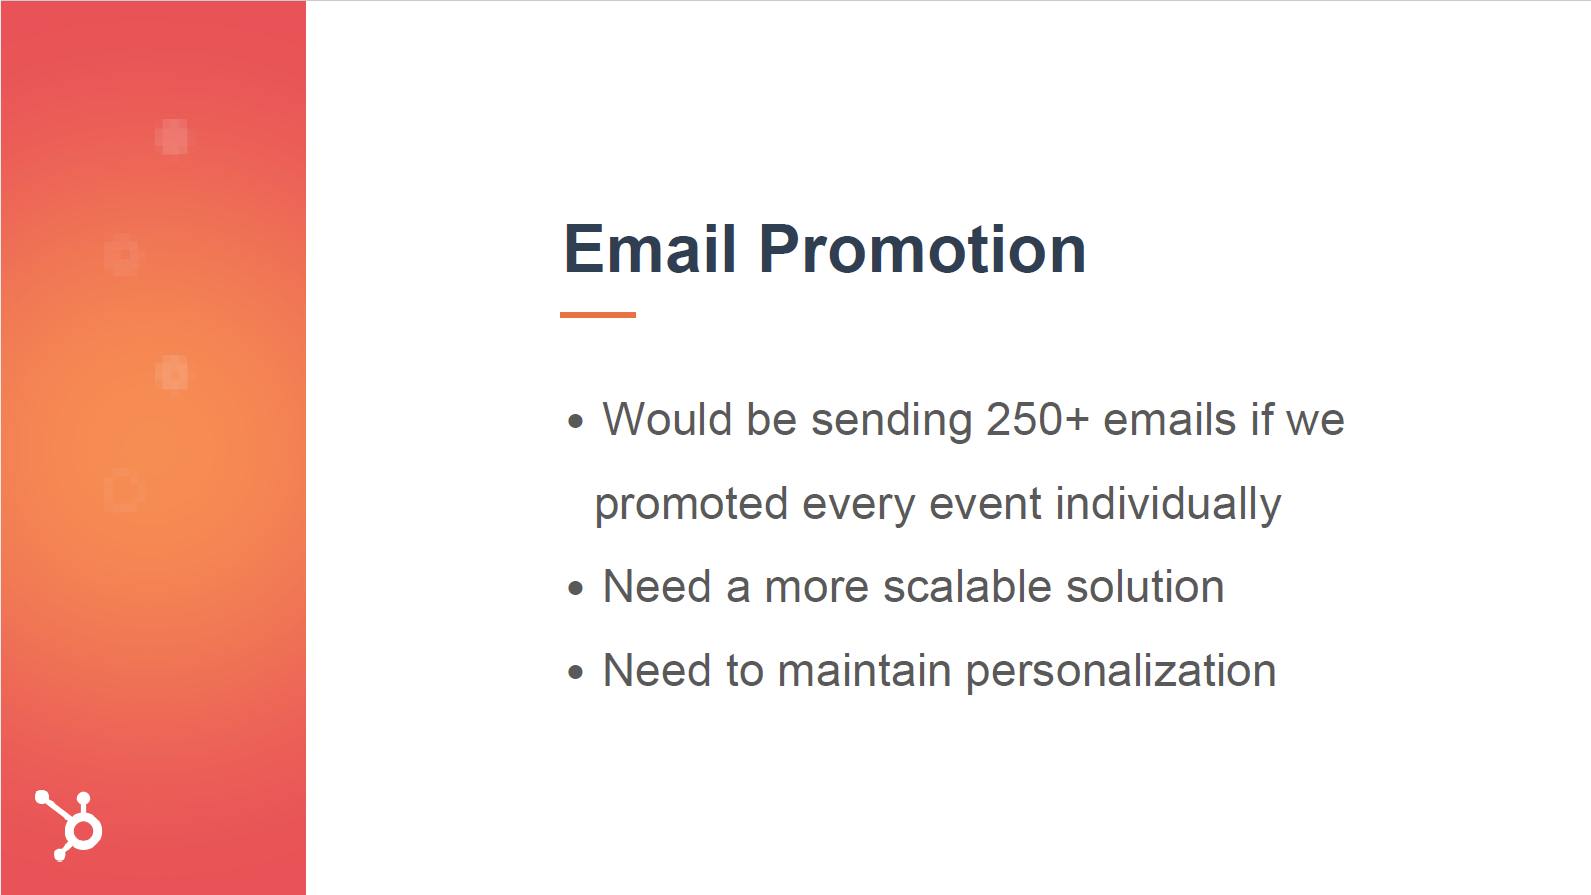 Email Promotion